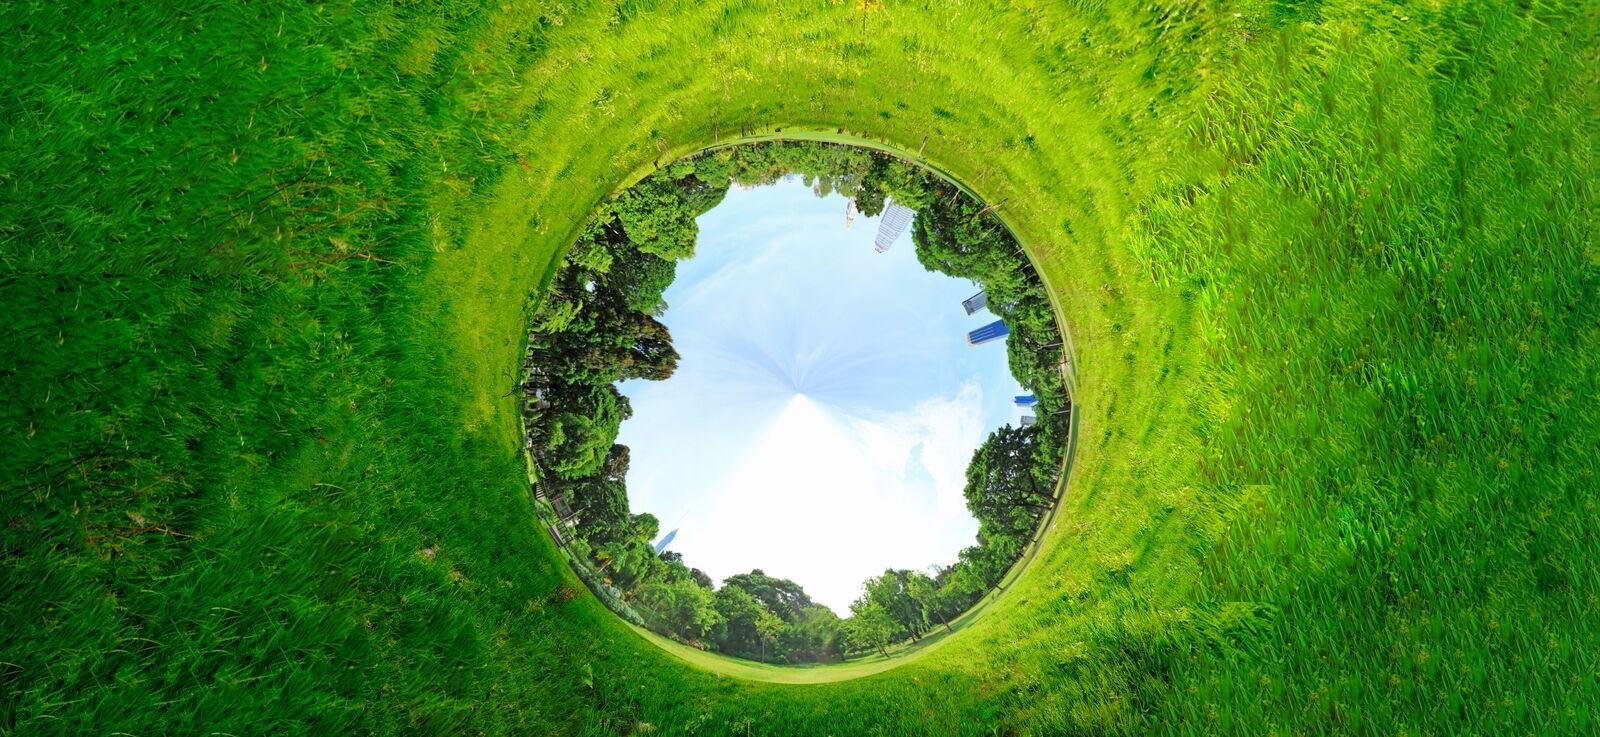 Panoramic Projection of a Green Field with Trees in the Summer